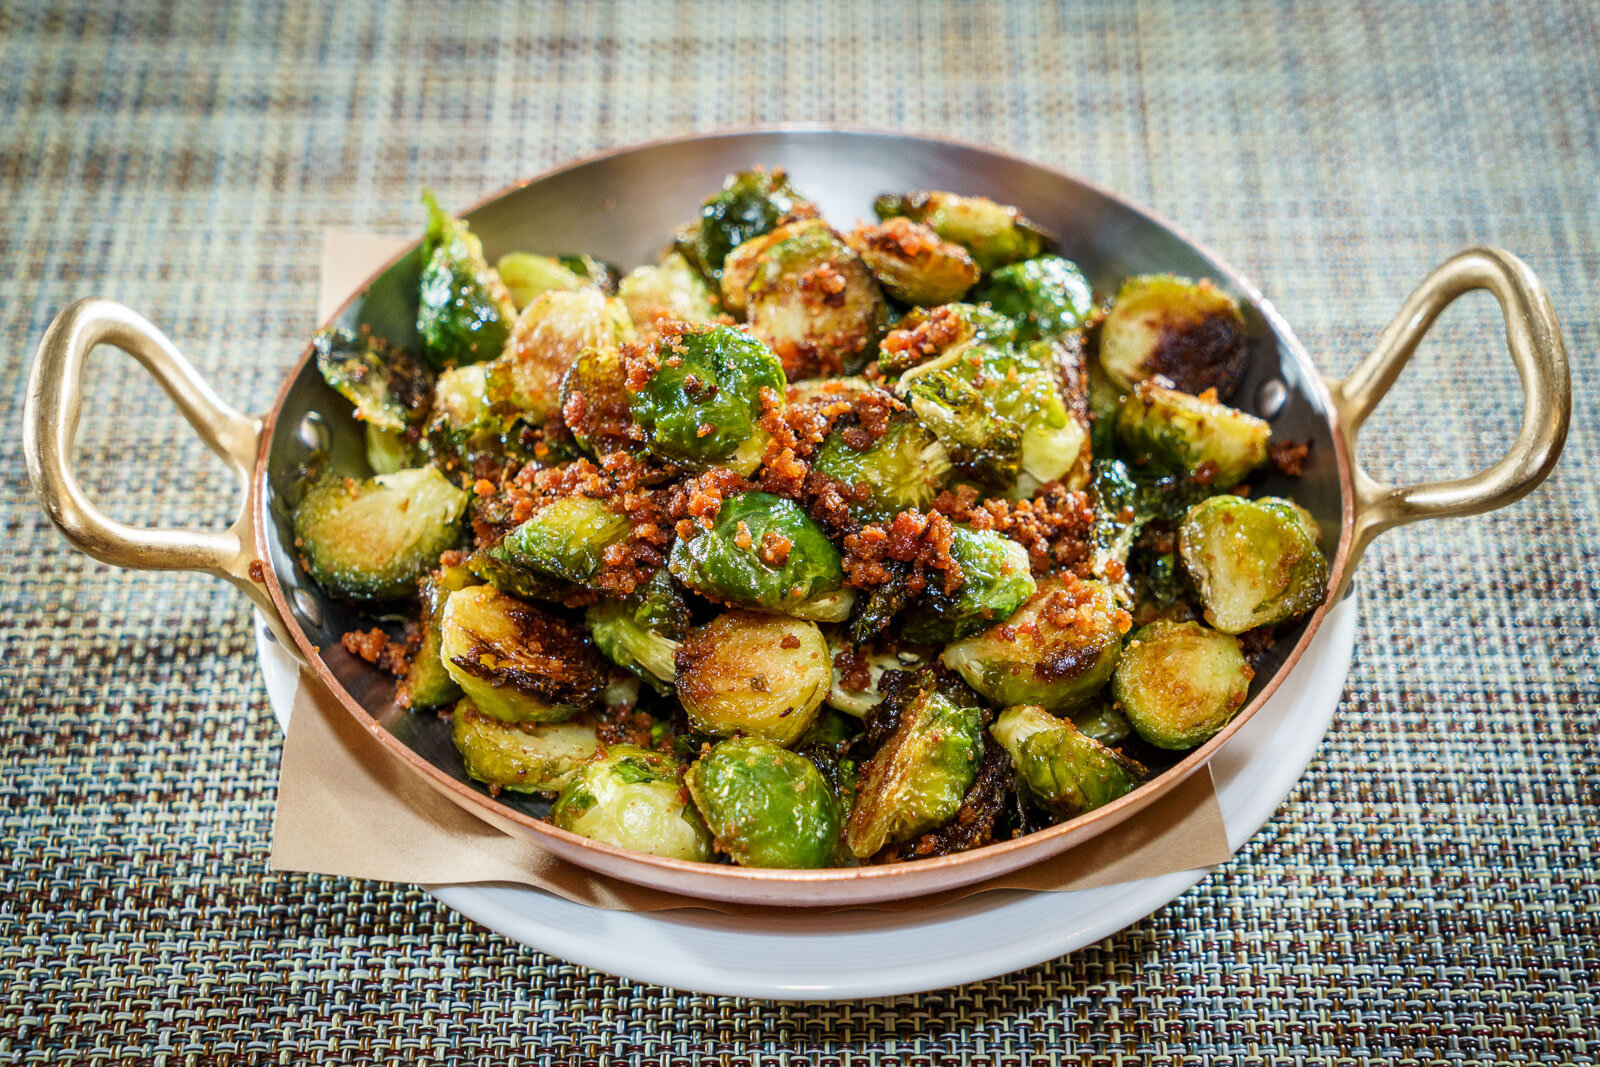  dish Brussels sprouts. Craft Restaurant farm-fresh American fare ,Address: 43 E 19th St, New York, NY 10003 Downtown Manhattan. photo by Stefano Giovannini 